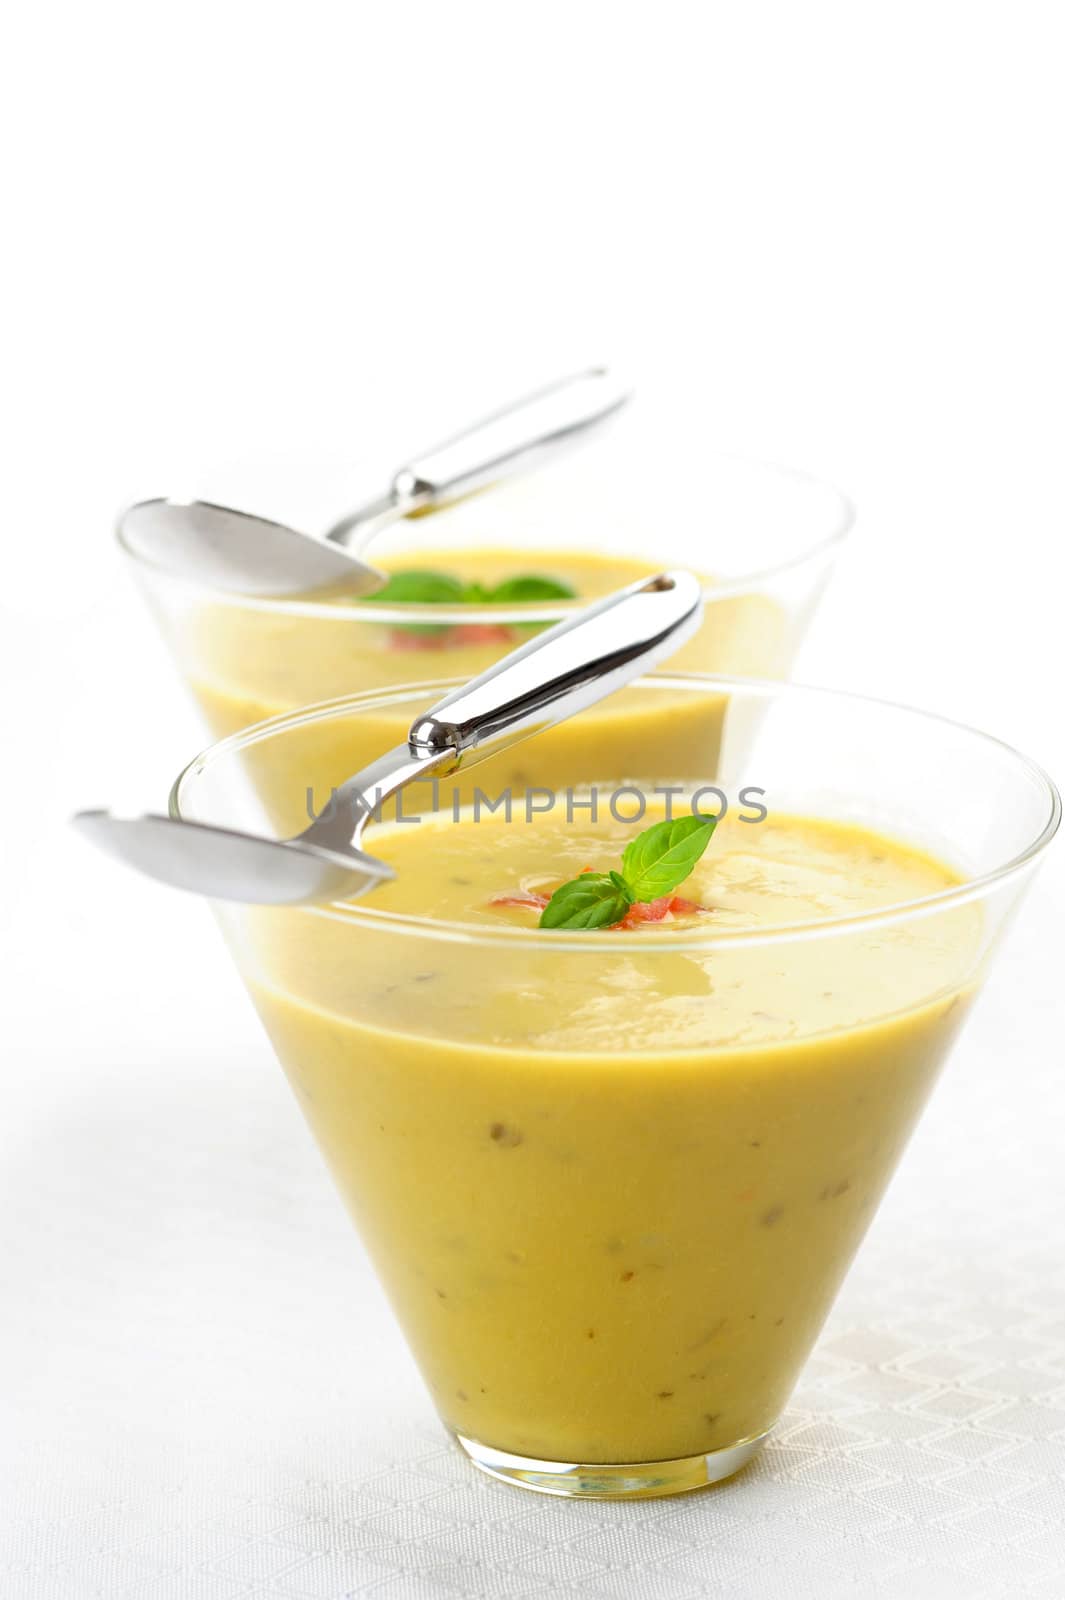 Soup Appetizer by billberryphotography